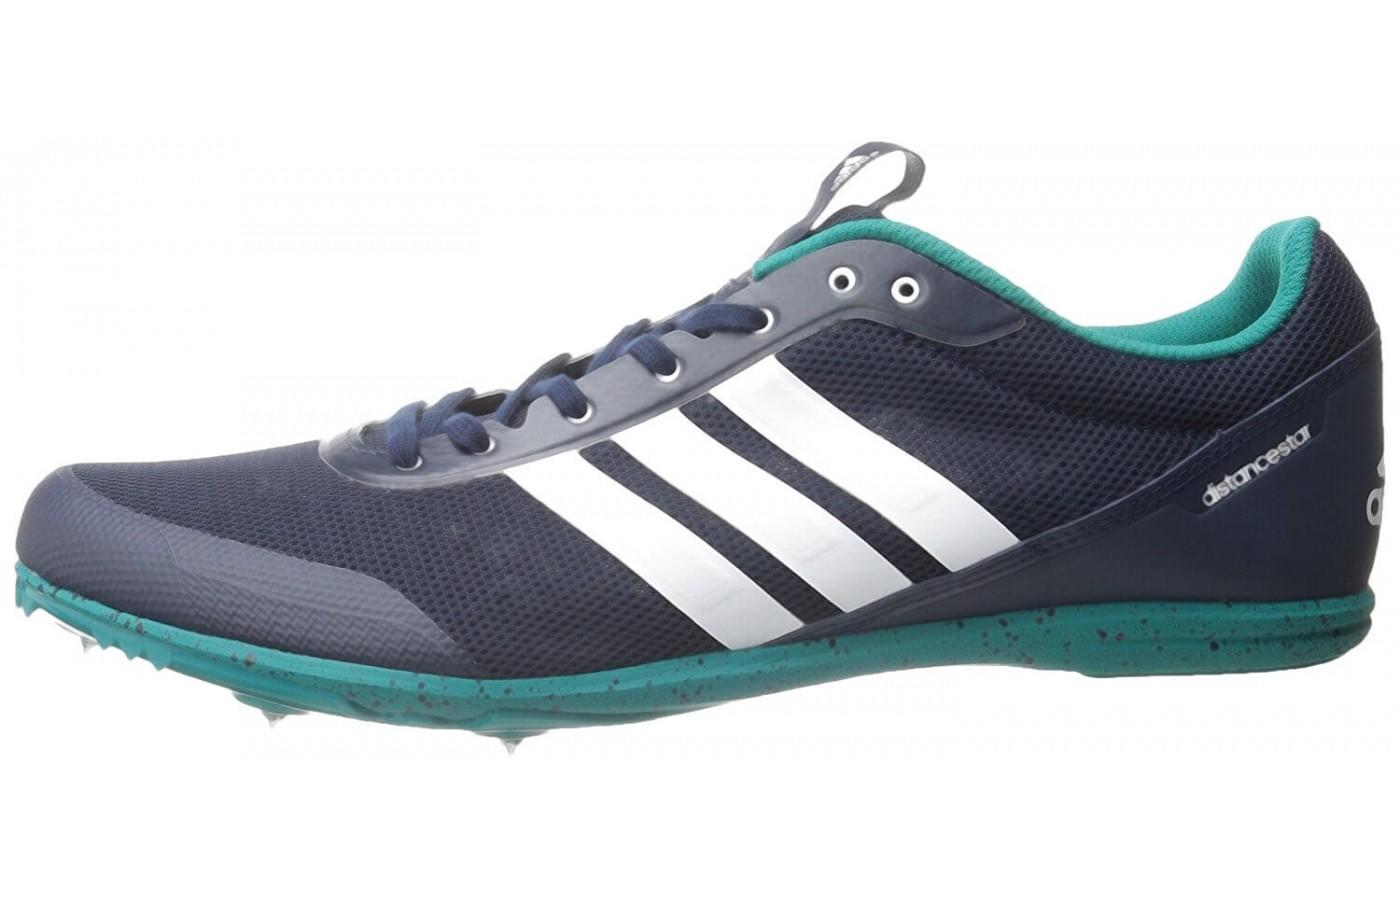 This is a lightweight track racing shoe